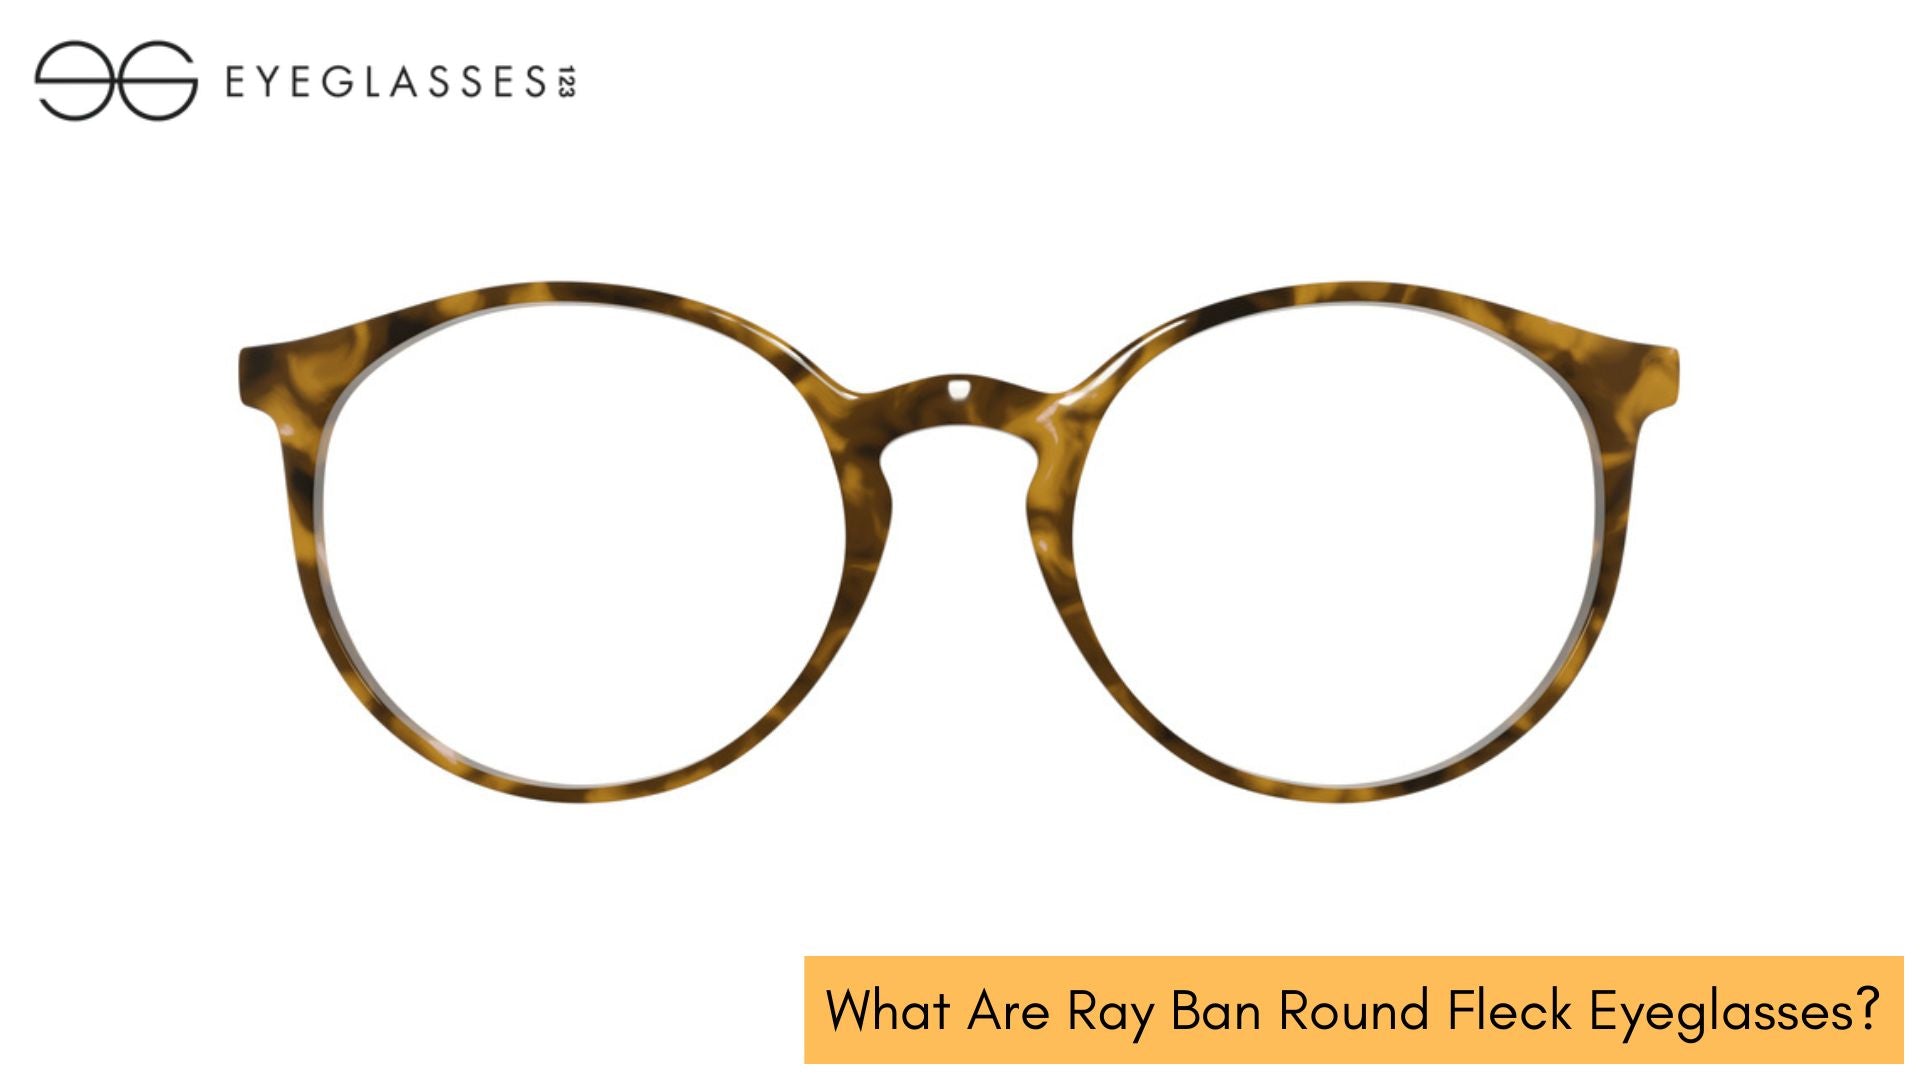 What Are Ray Ban Round Fleck Eyeglasses?